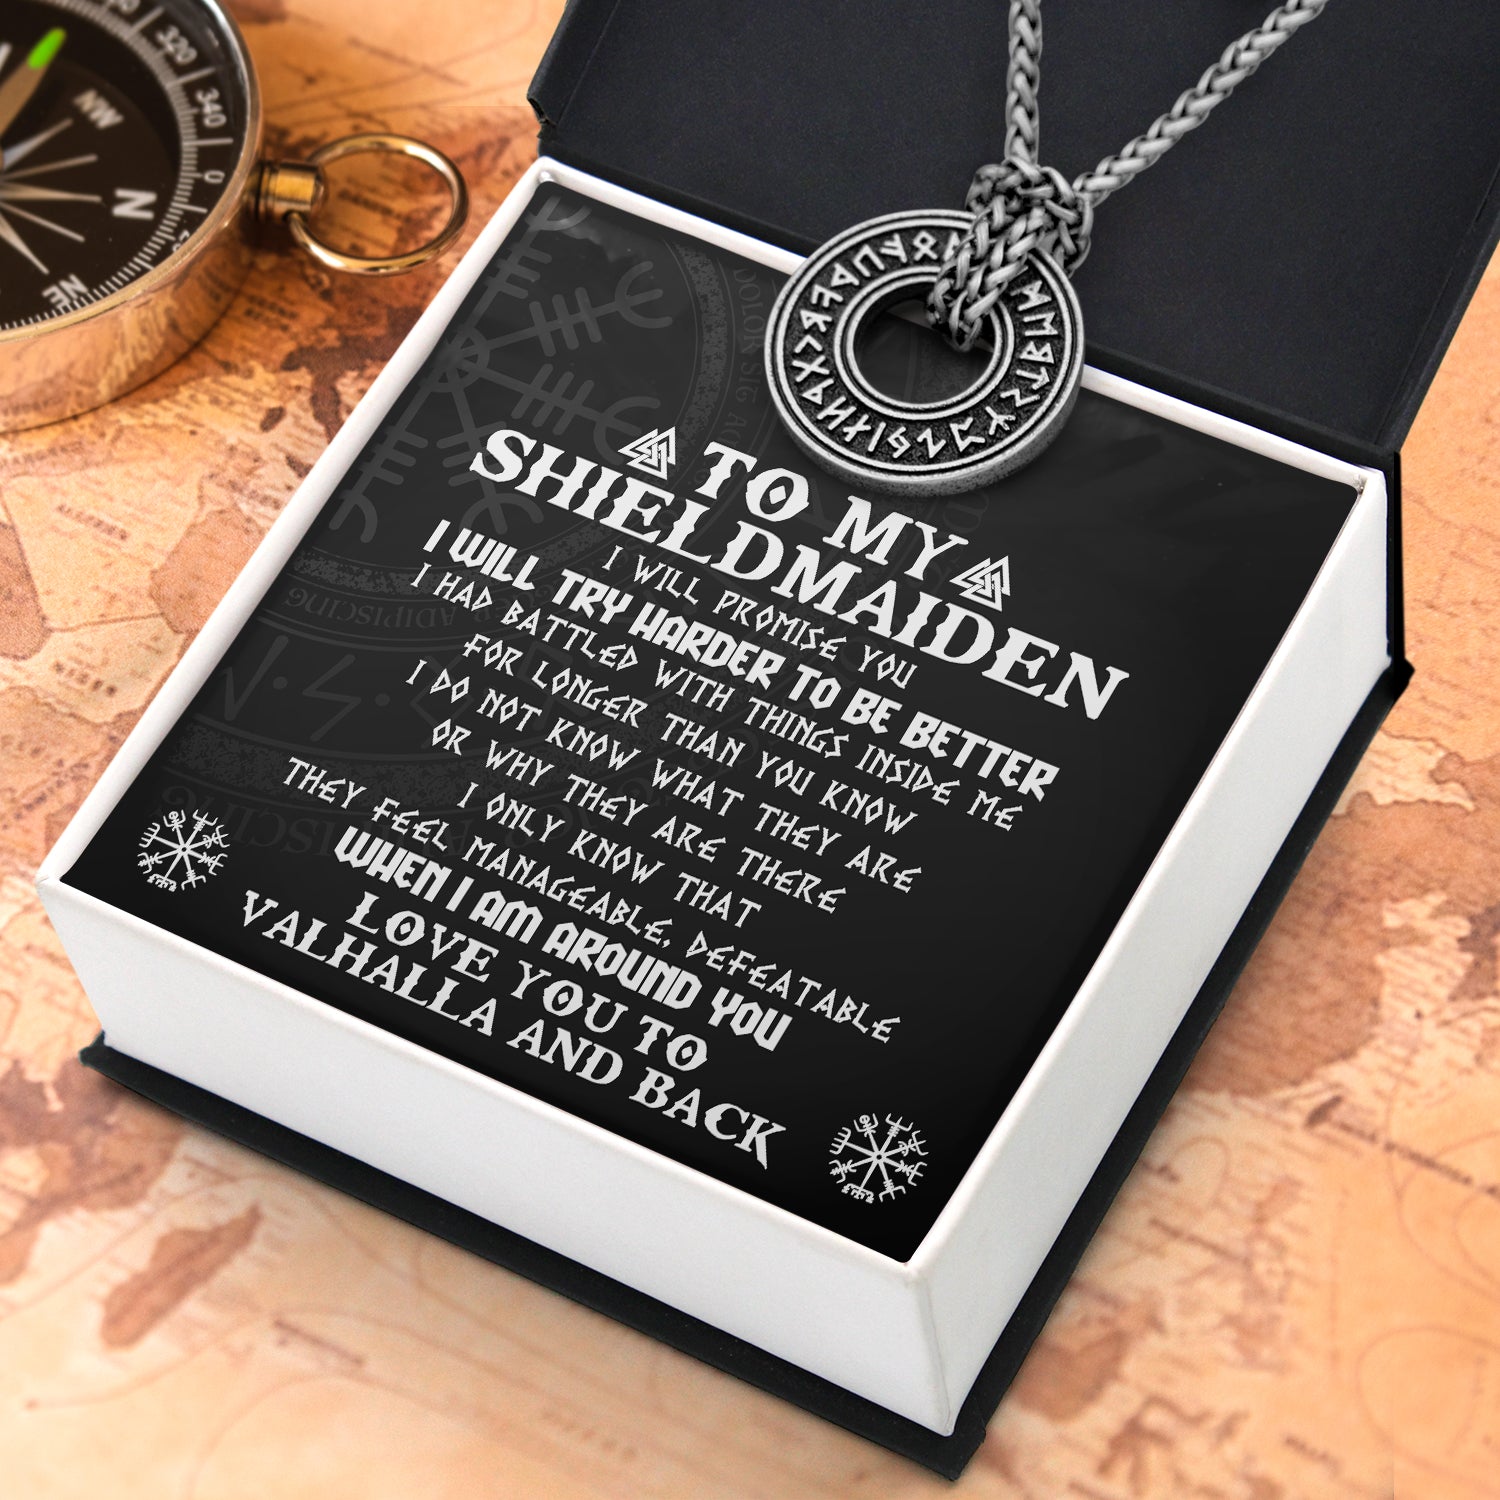 Viking Rune Necklace - Viking - To My Shield Maiden - I Love You To Valhalla And Back - Ukgndy13004